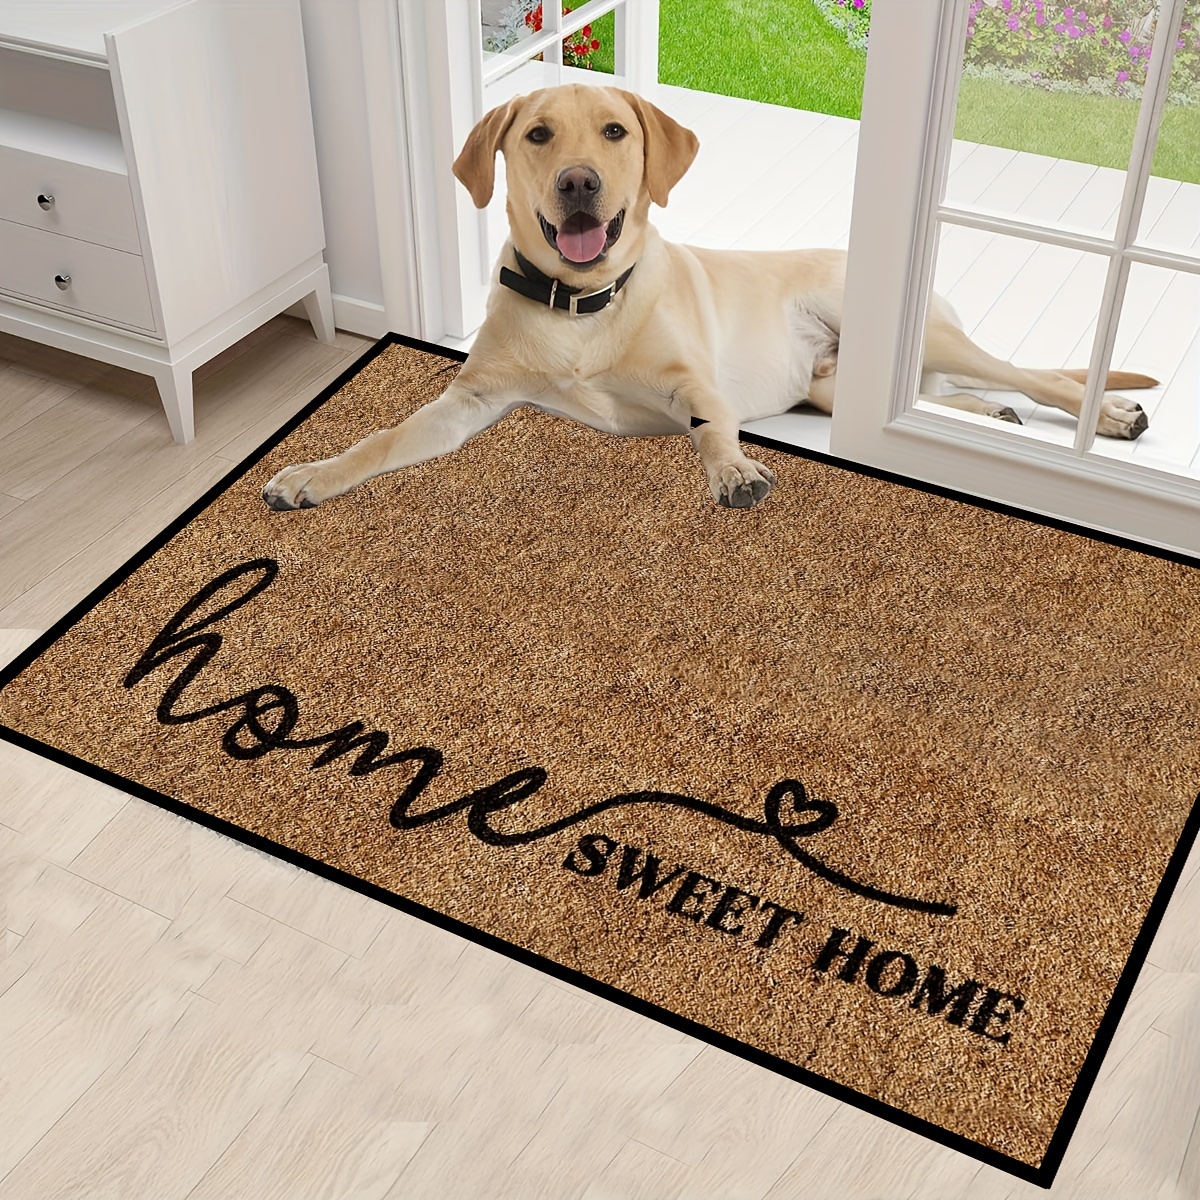 

1pc Welcome Doormat Polyester Machine Washable Rectangle Non-slip Stain Resistant Entrance Rug For Indoor Outdoor Use - Soft Crystal Velvet Floor Mat For Living Room, Bathroom, Doorway